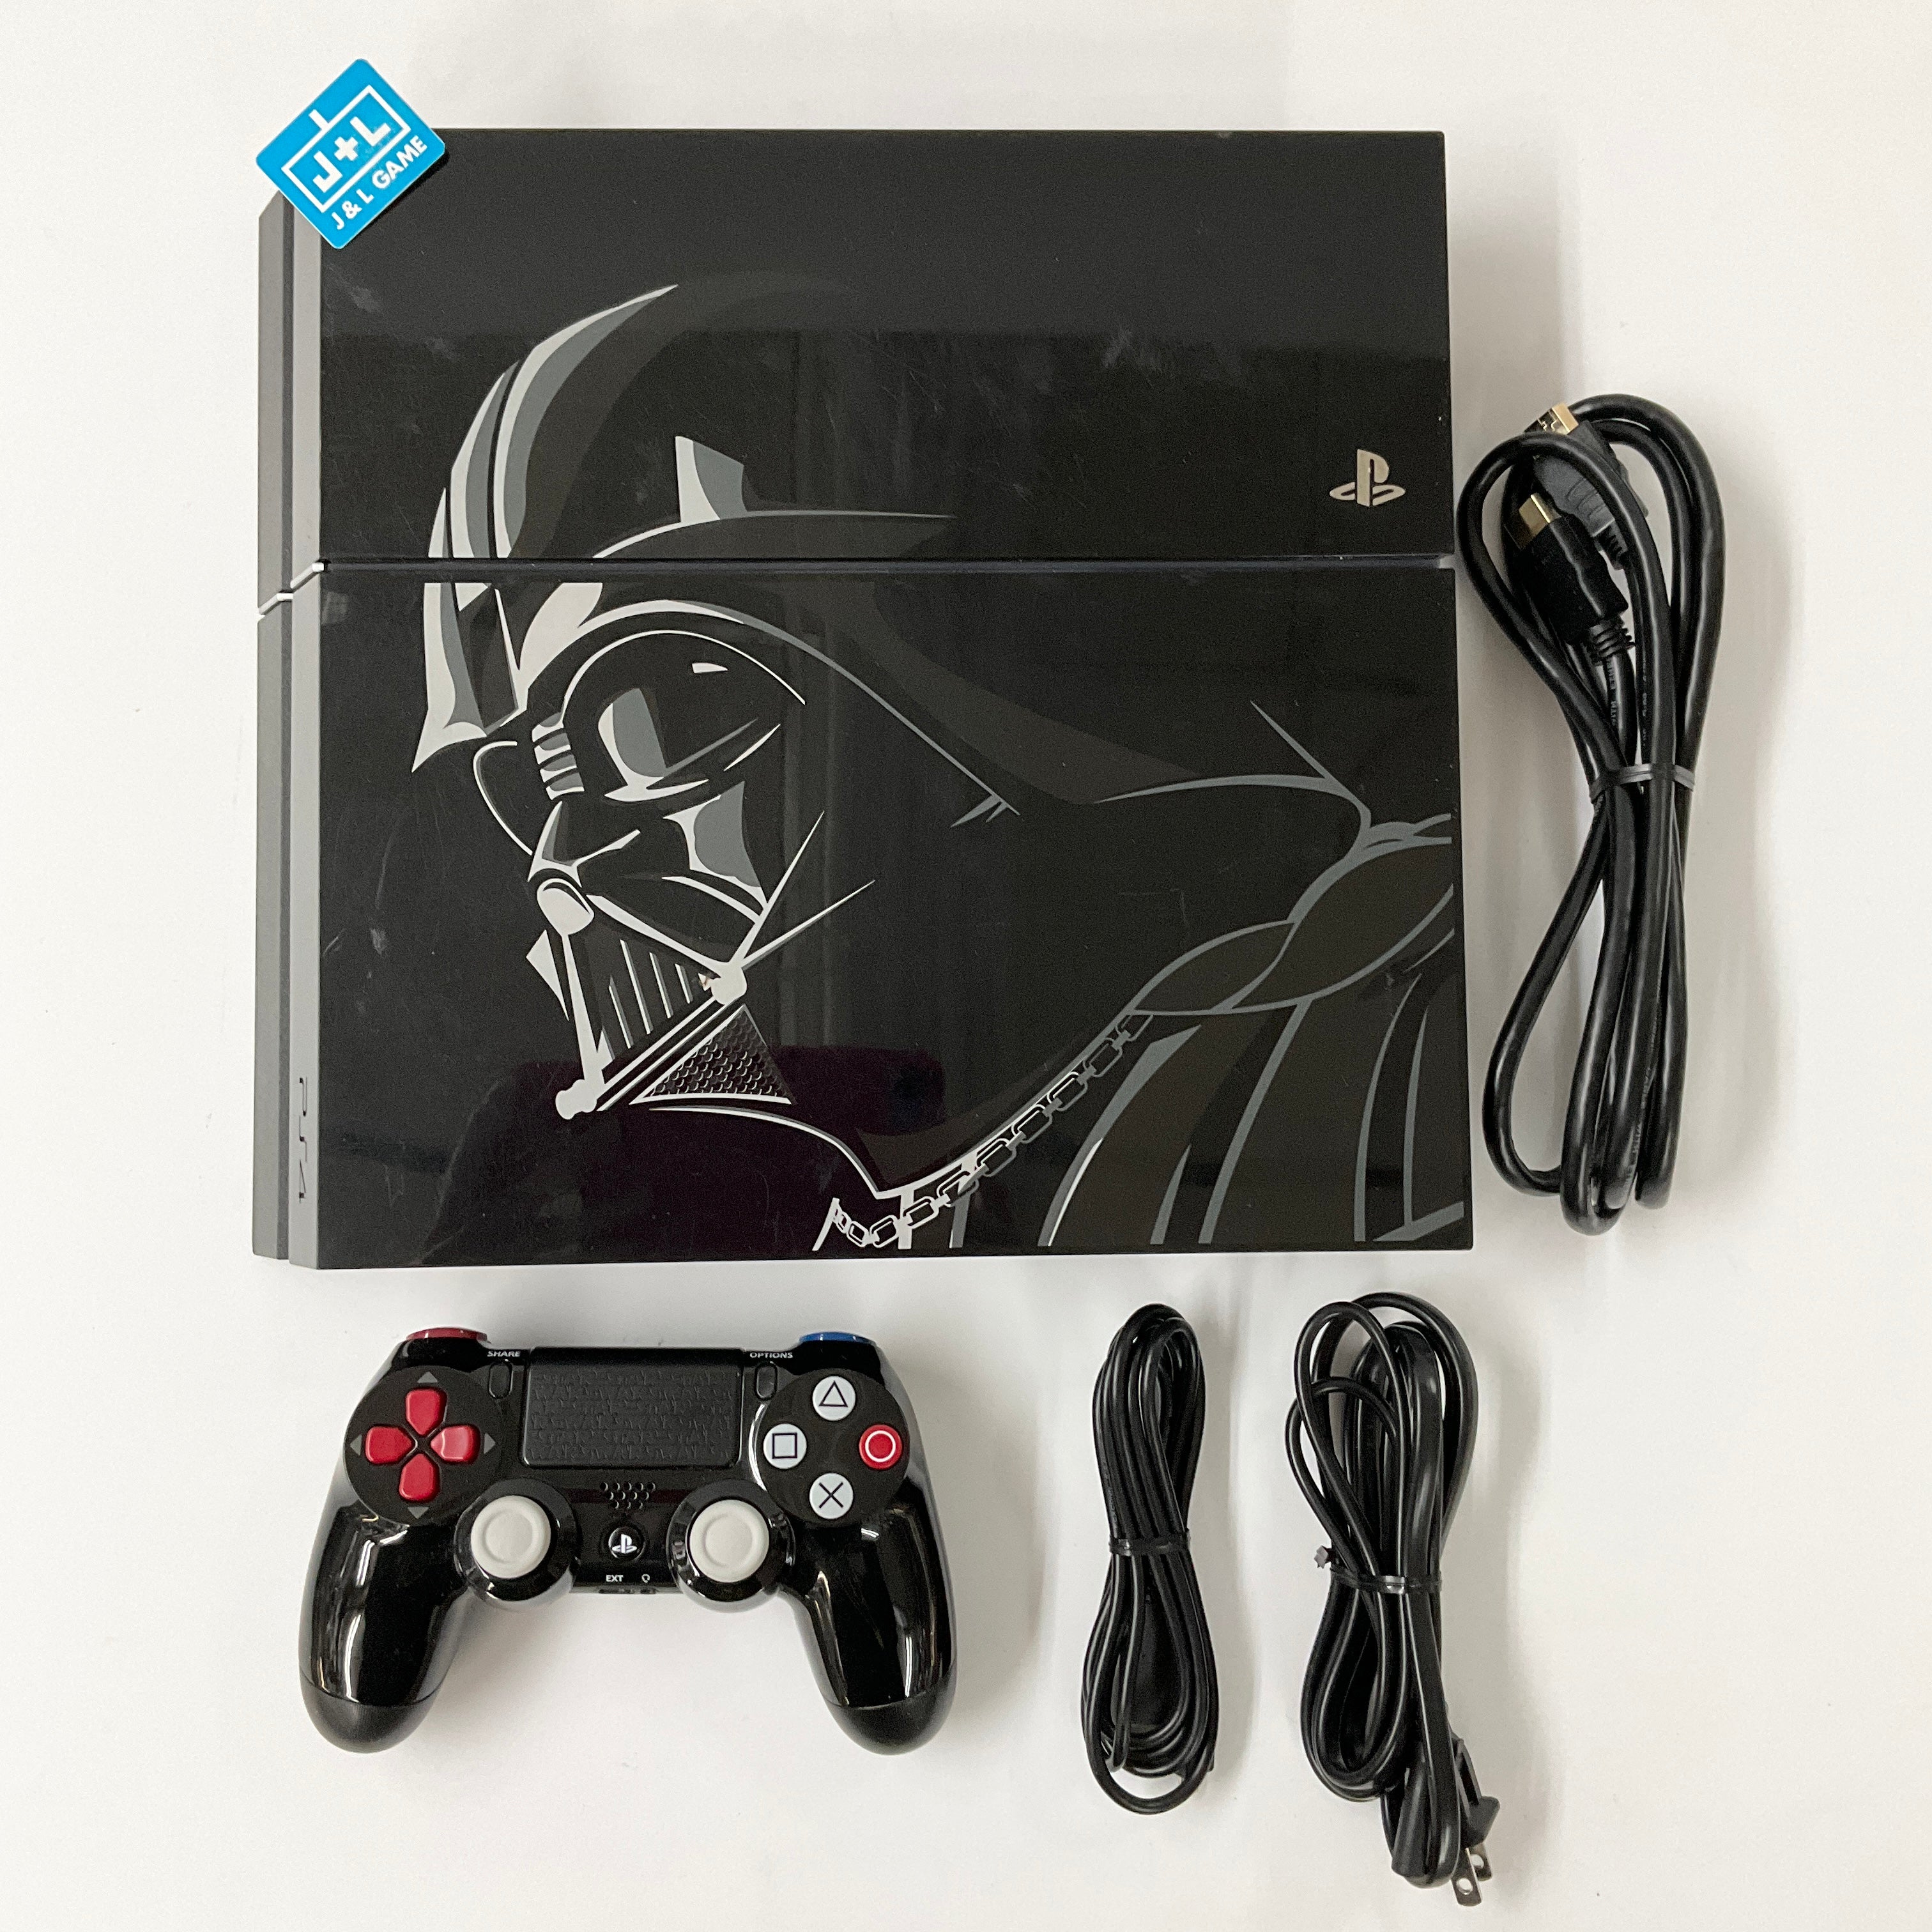 Sony PlayStation 4 500GB Console - Star Wars Battlefront Limited Edition Bundle (Darth Vader) - (PS4) Playstation 4 [Pre-Owned] Consoles Sony   